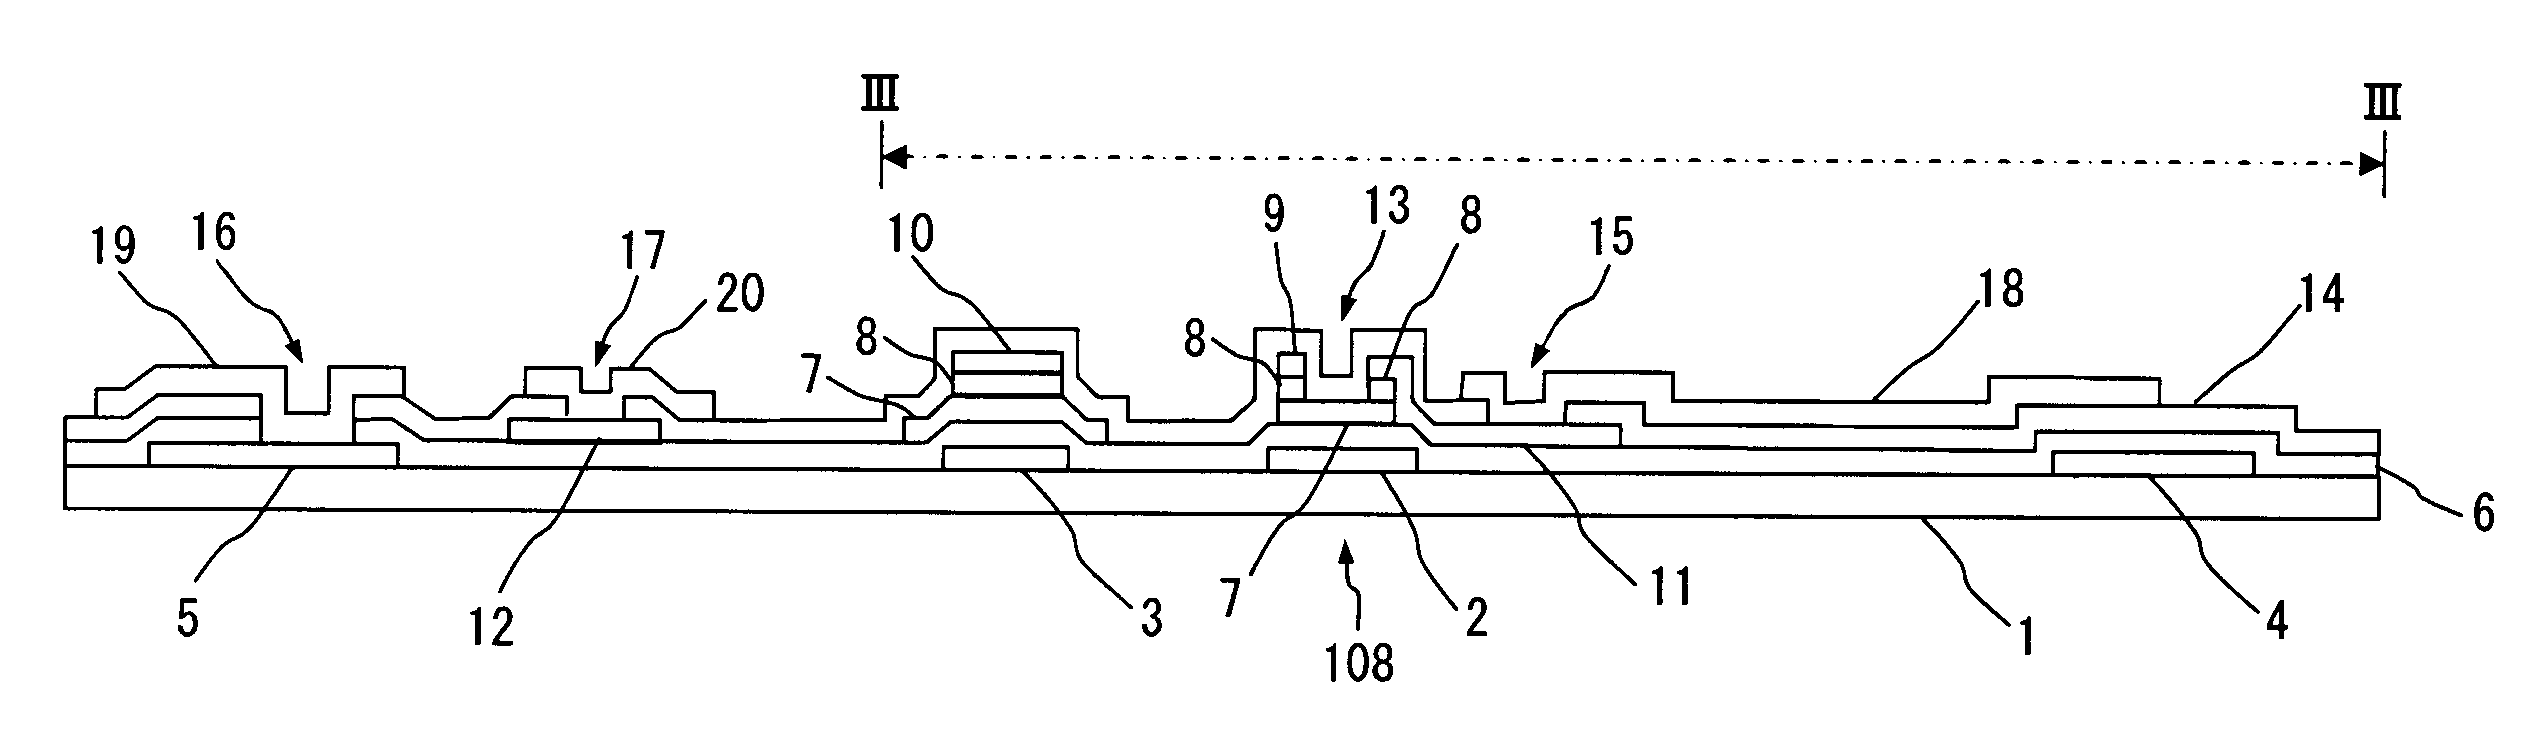 TFT array substrate and method of manufacturing the same